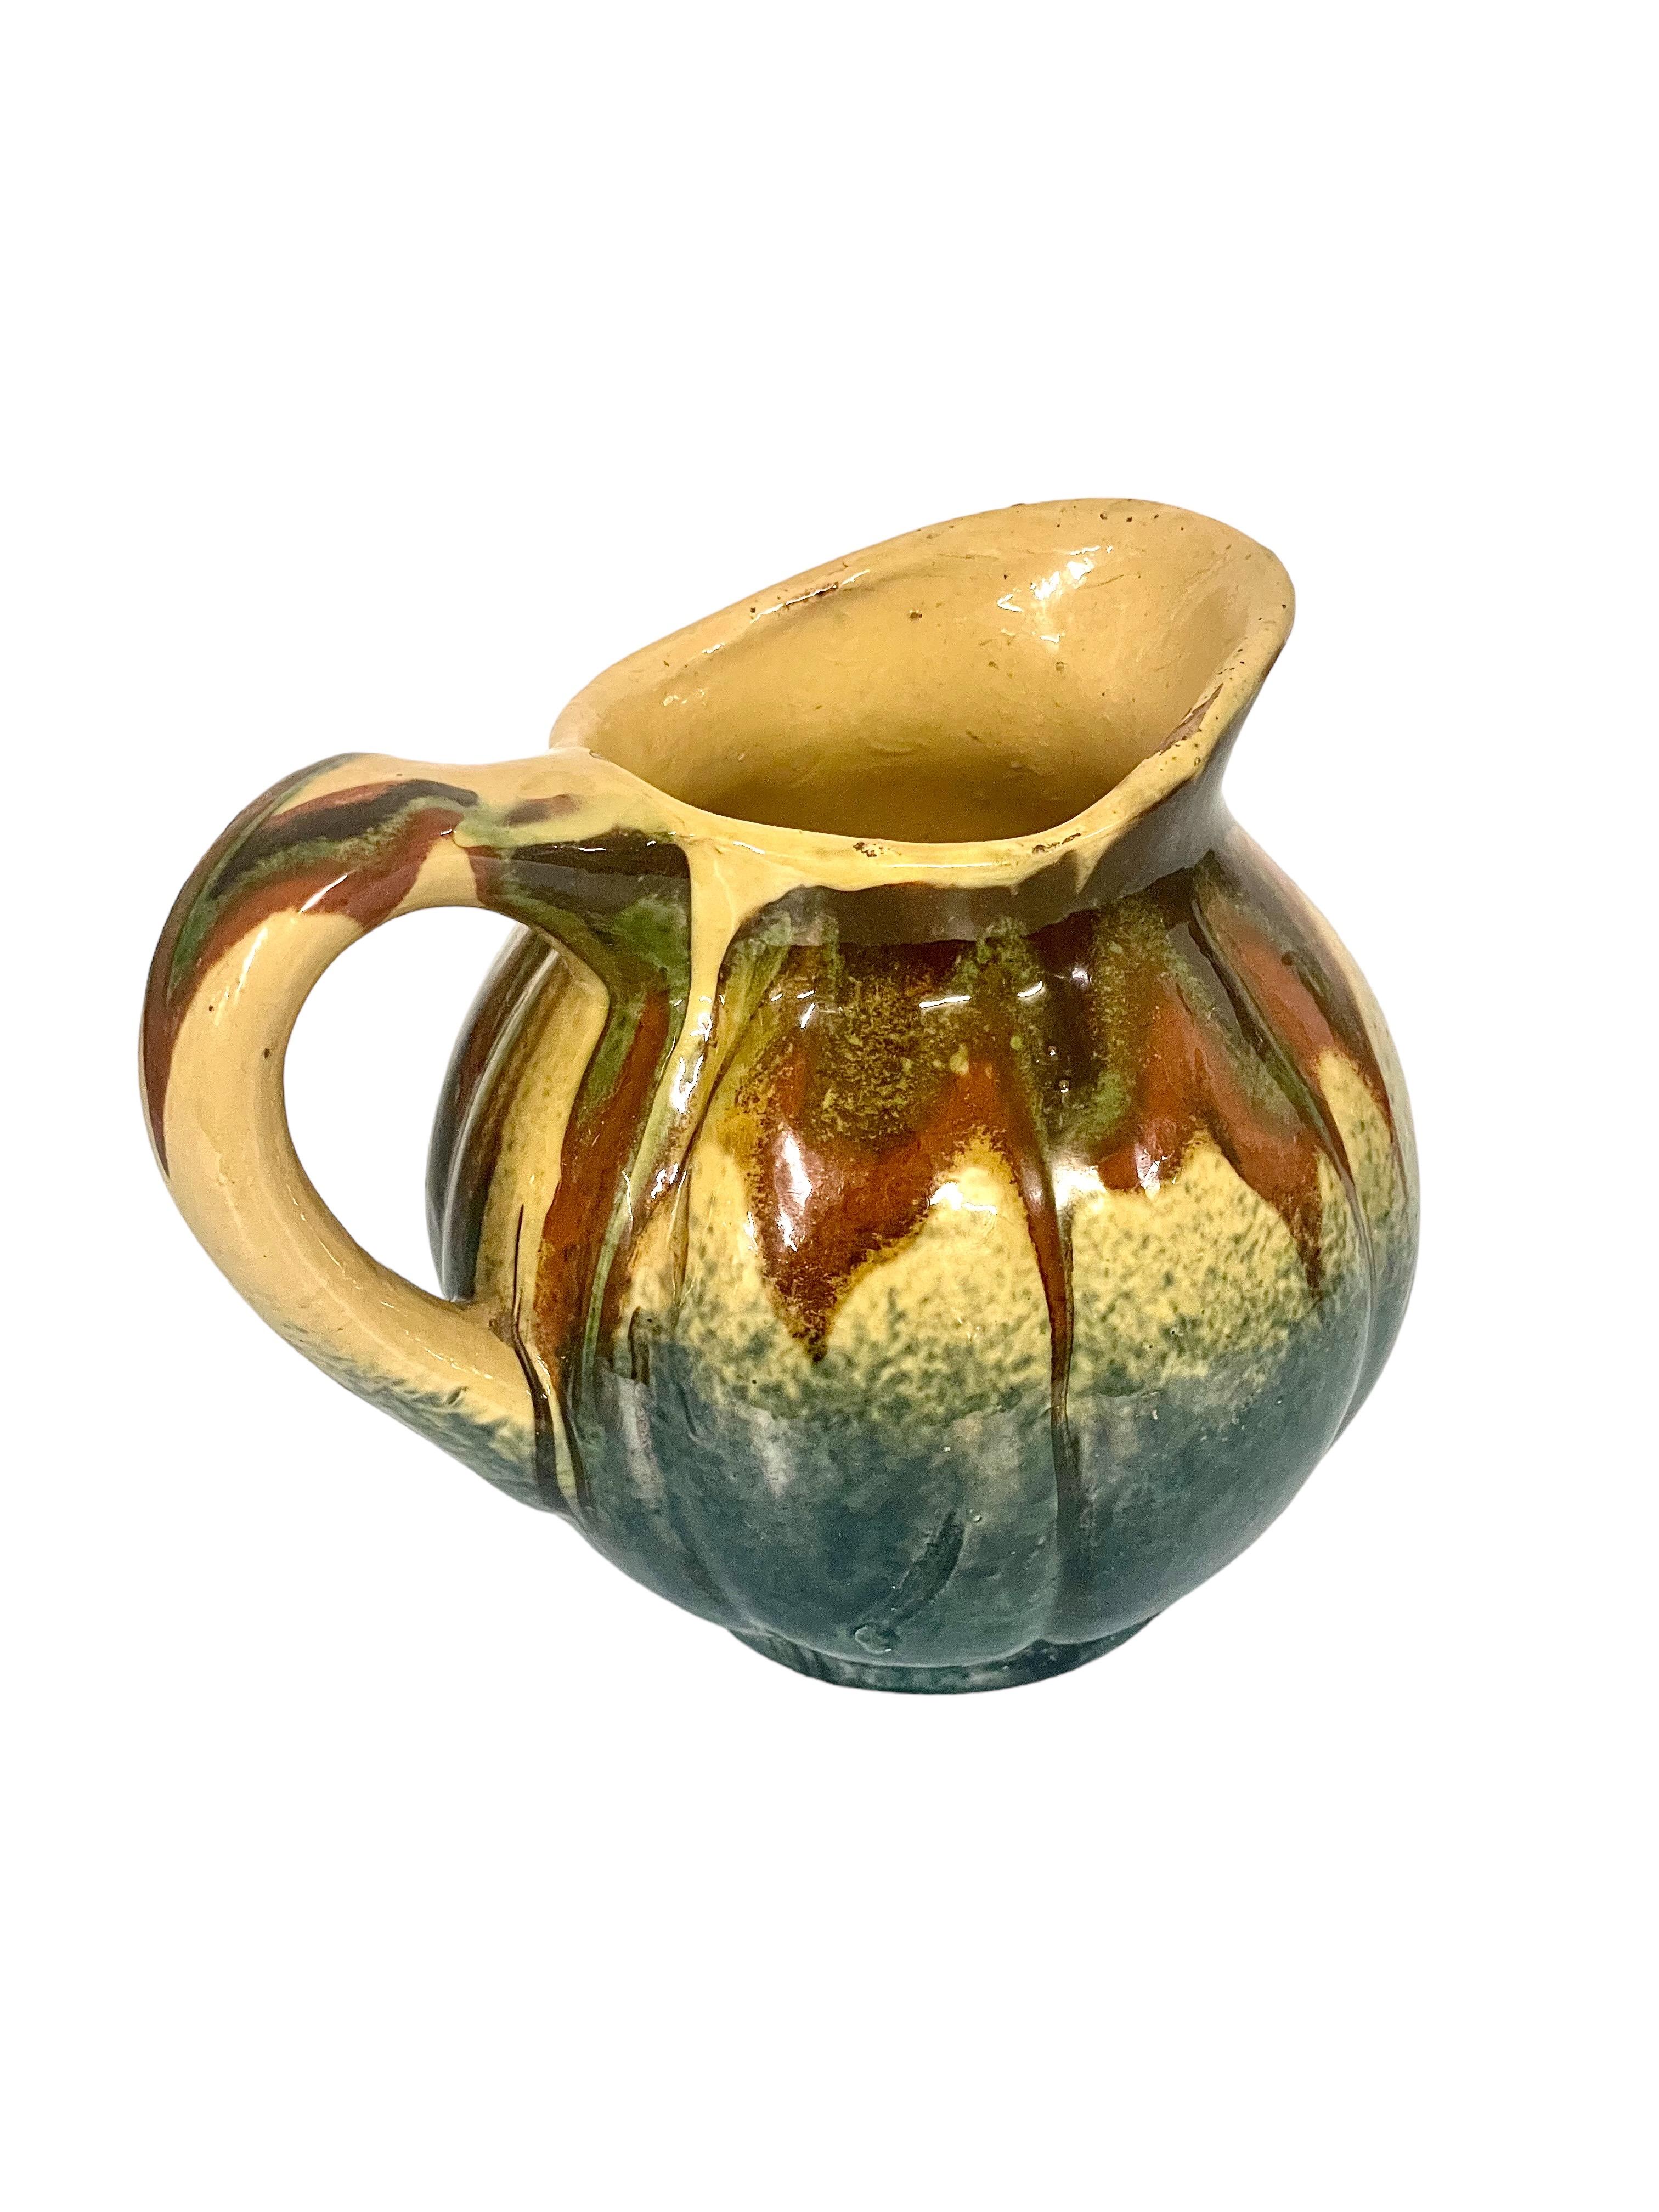 French Antique Glazed Jug in a Melon Shape. Provence 19th Century For Sale 1